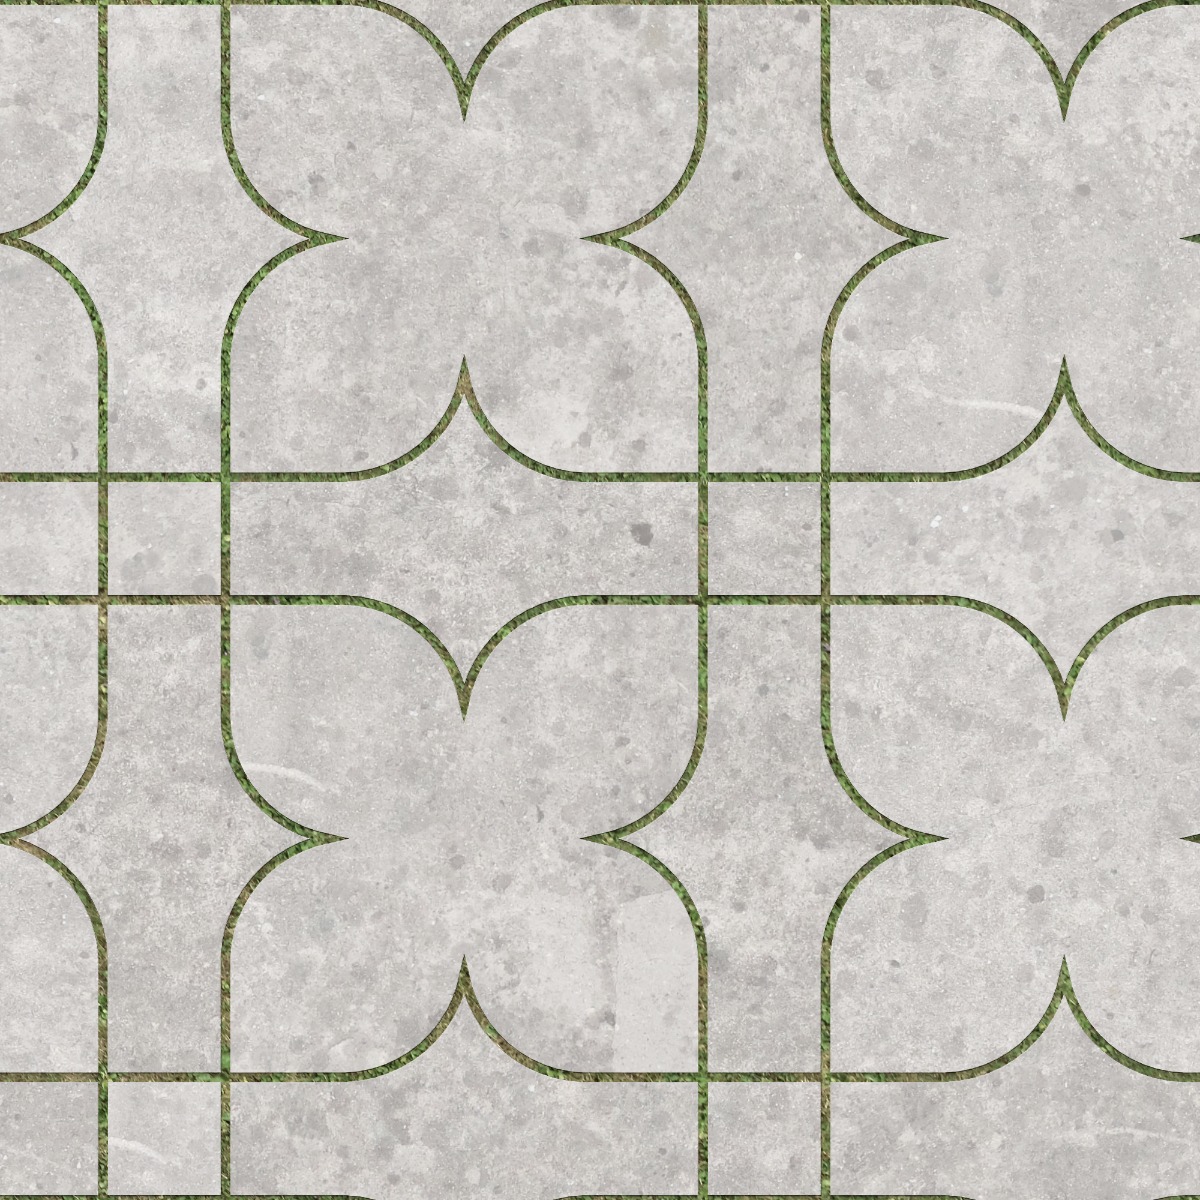 A seamless concrete texture with concrete blocks arranged in a Four Leaf pattern